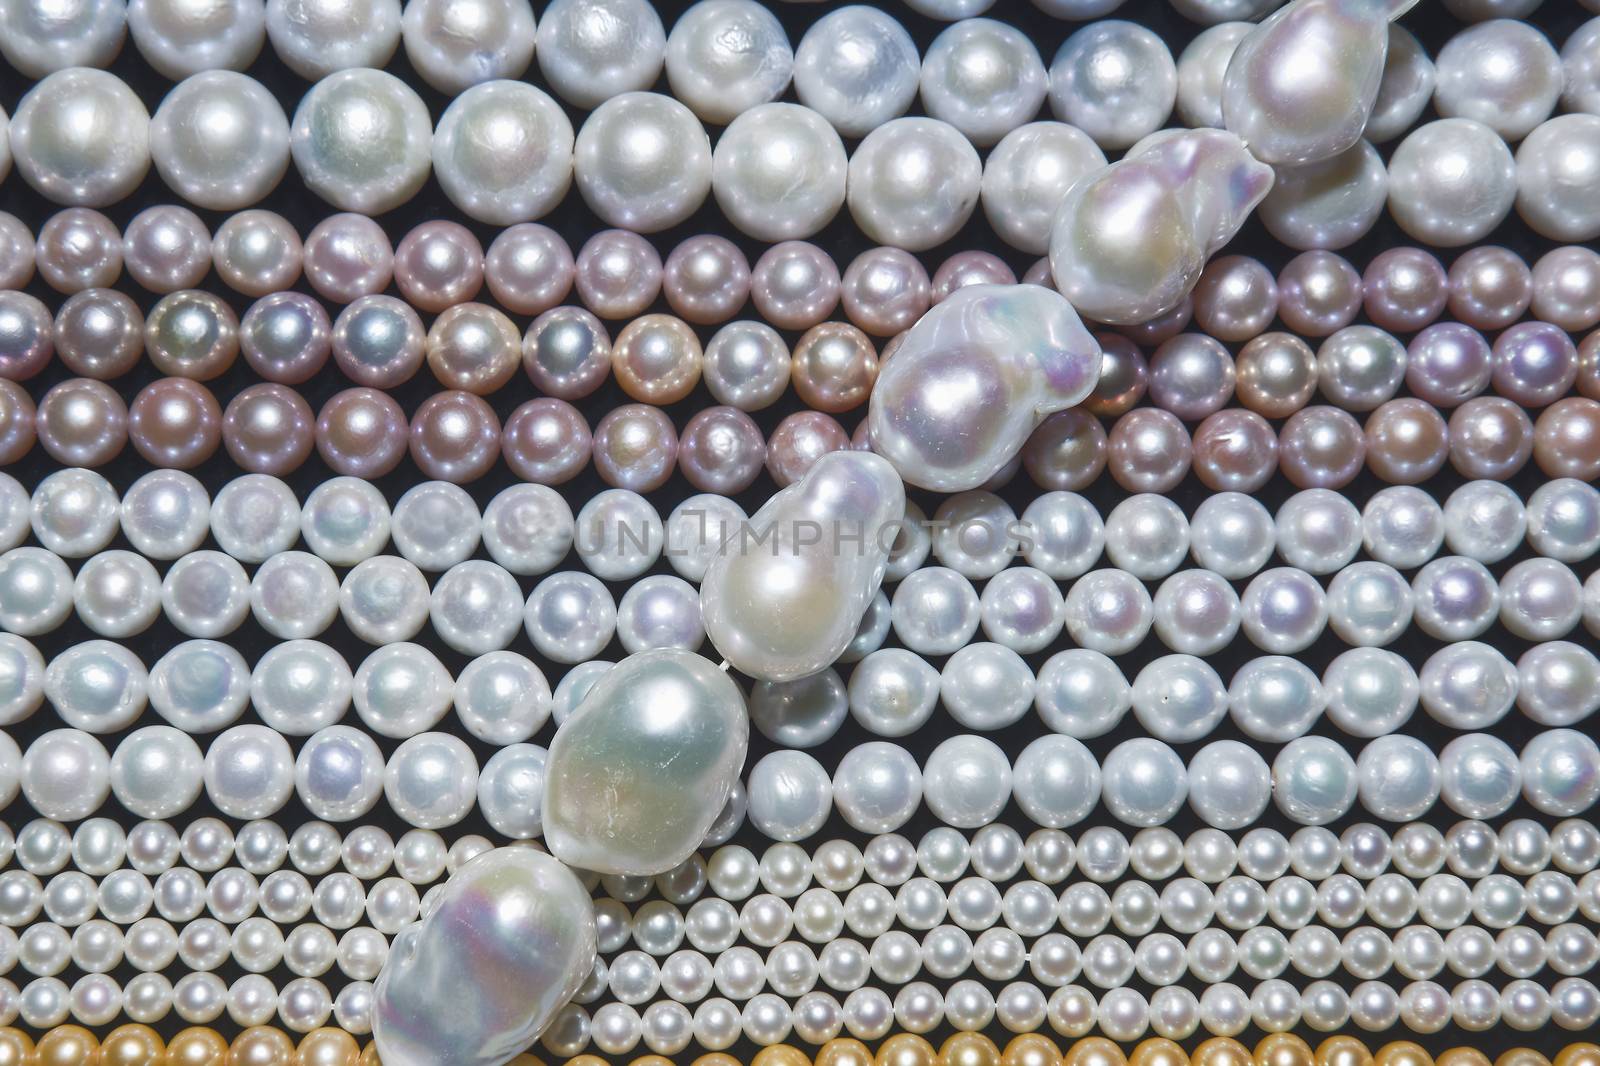 Japanese pearl threads with different colors and diameters